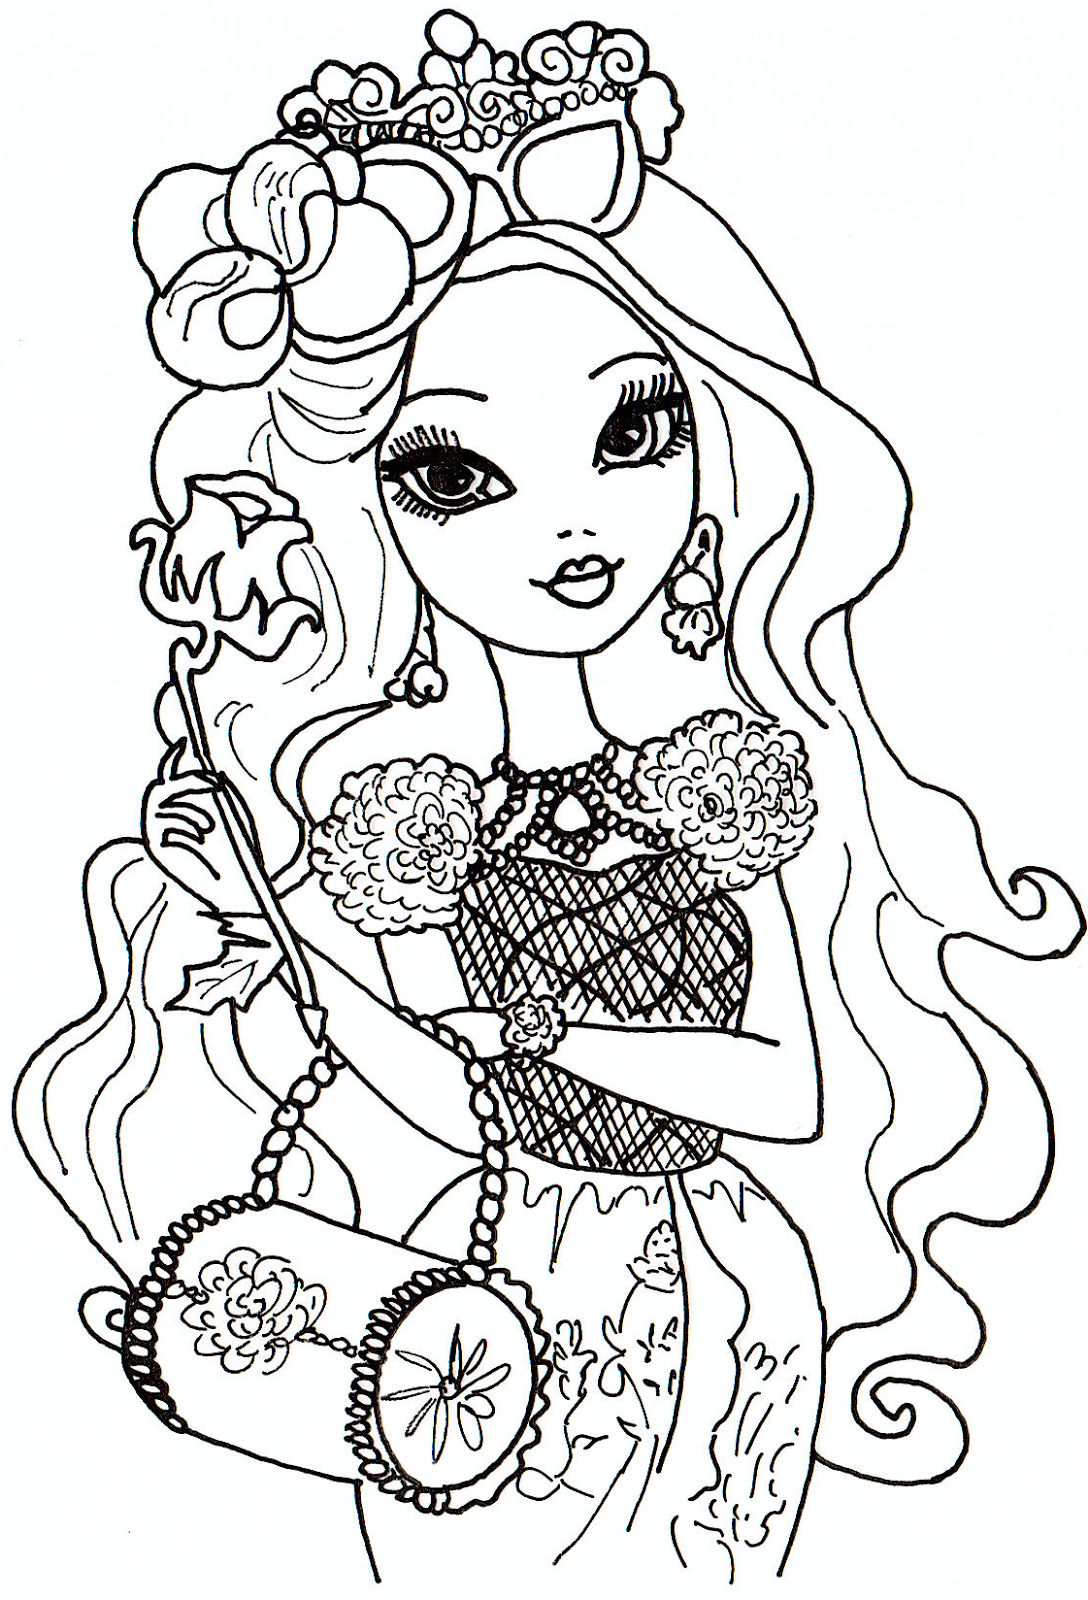 All About Ever After High Dolls: June 2013